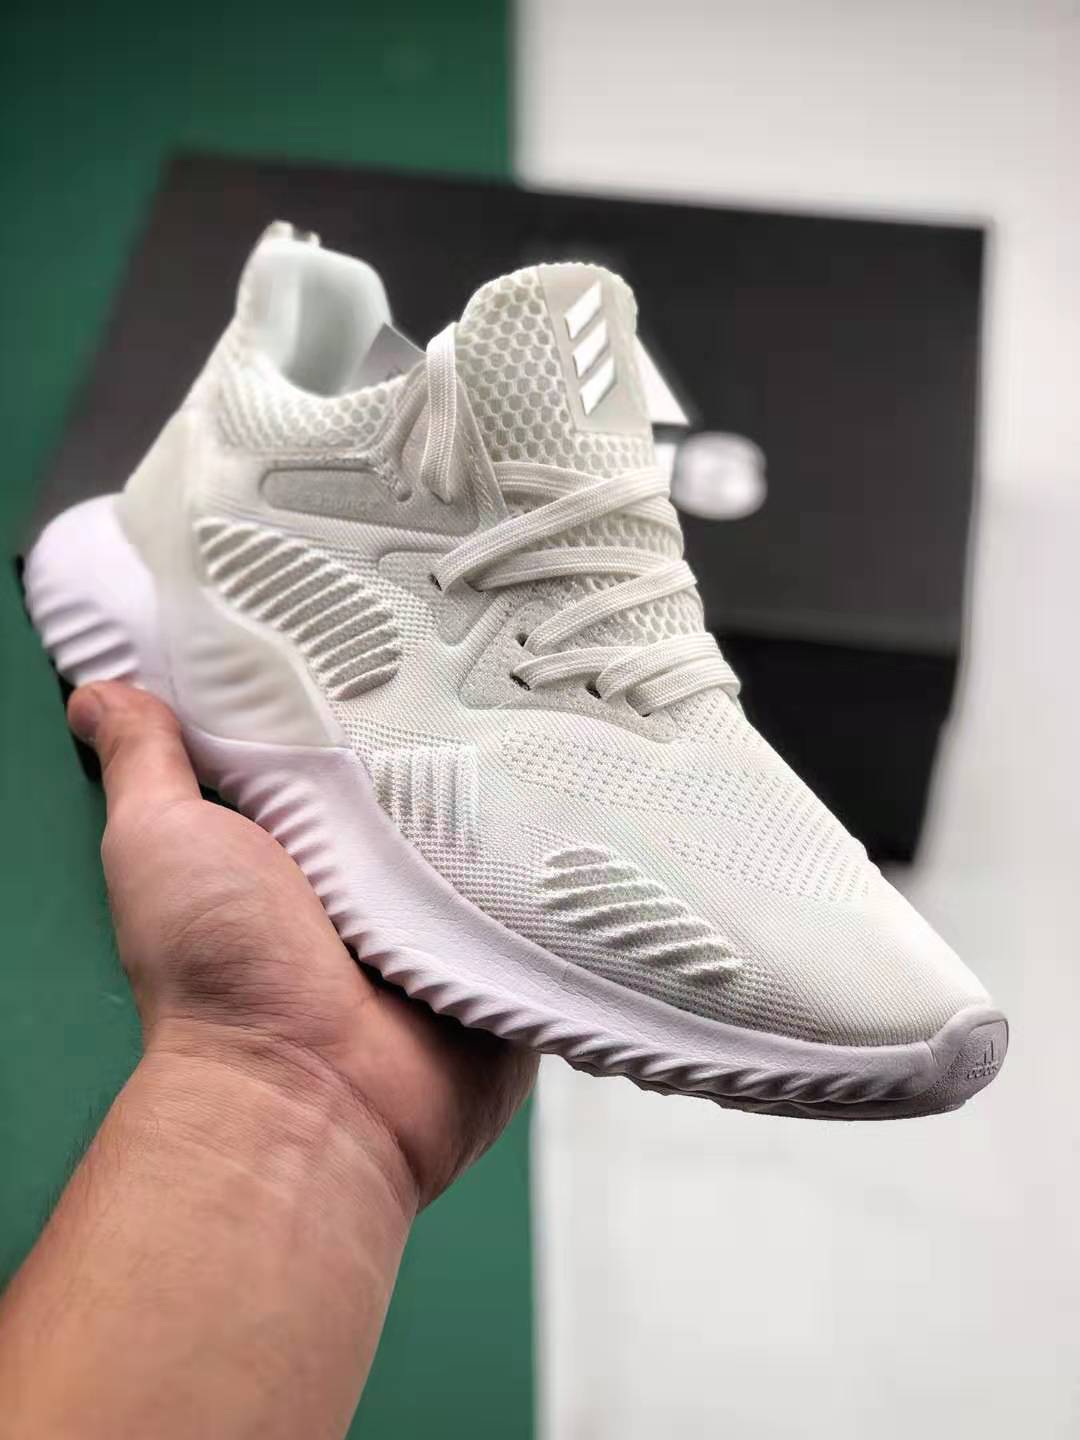 Adidas Alphabounce Beyond 'Undyed' DB1125 - Exclusive Neutral Running Shoes